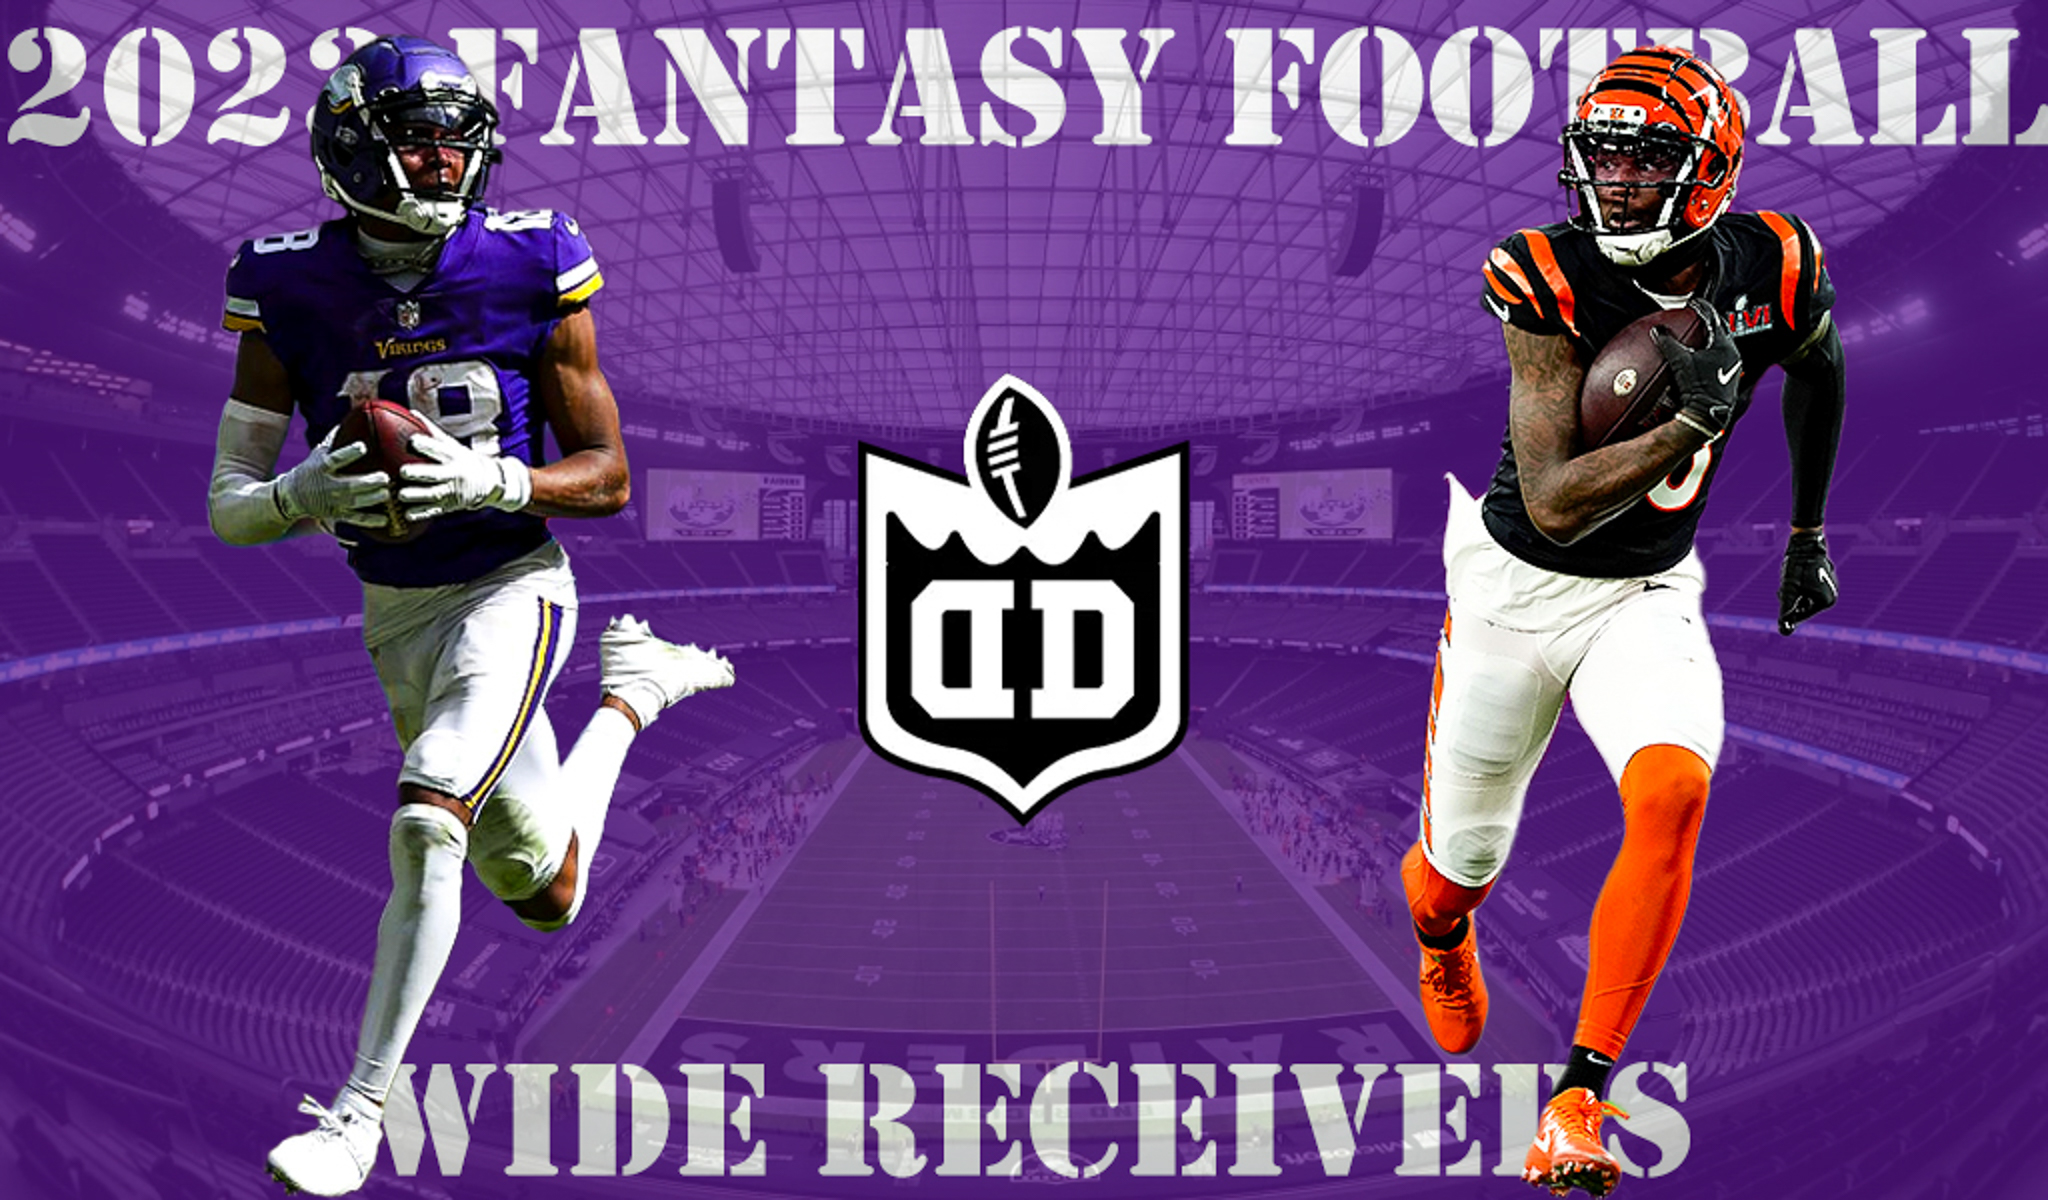 Best Fantasy Football Seasons by a Wide Receiver